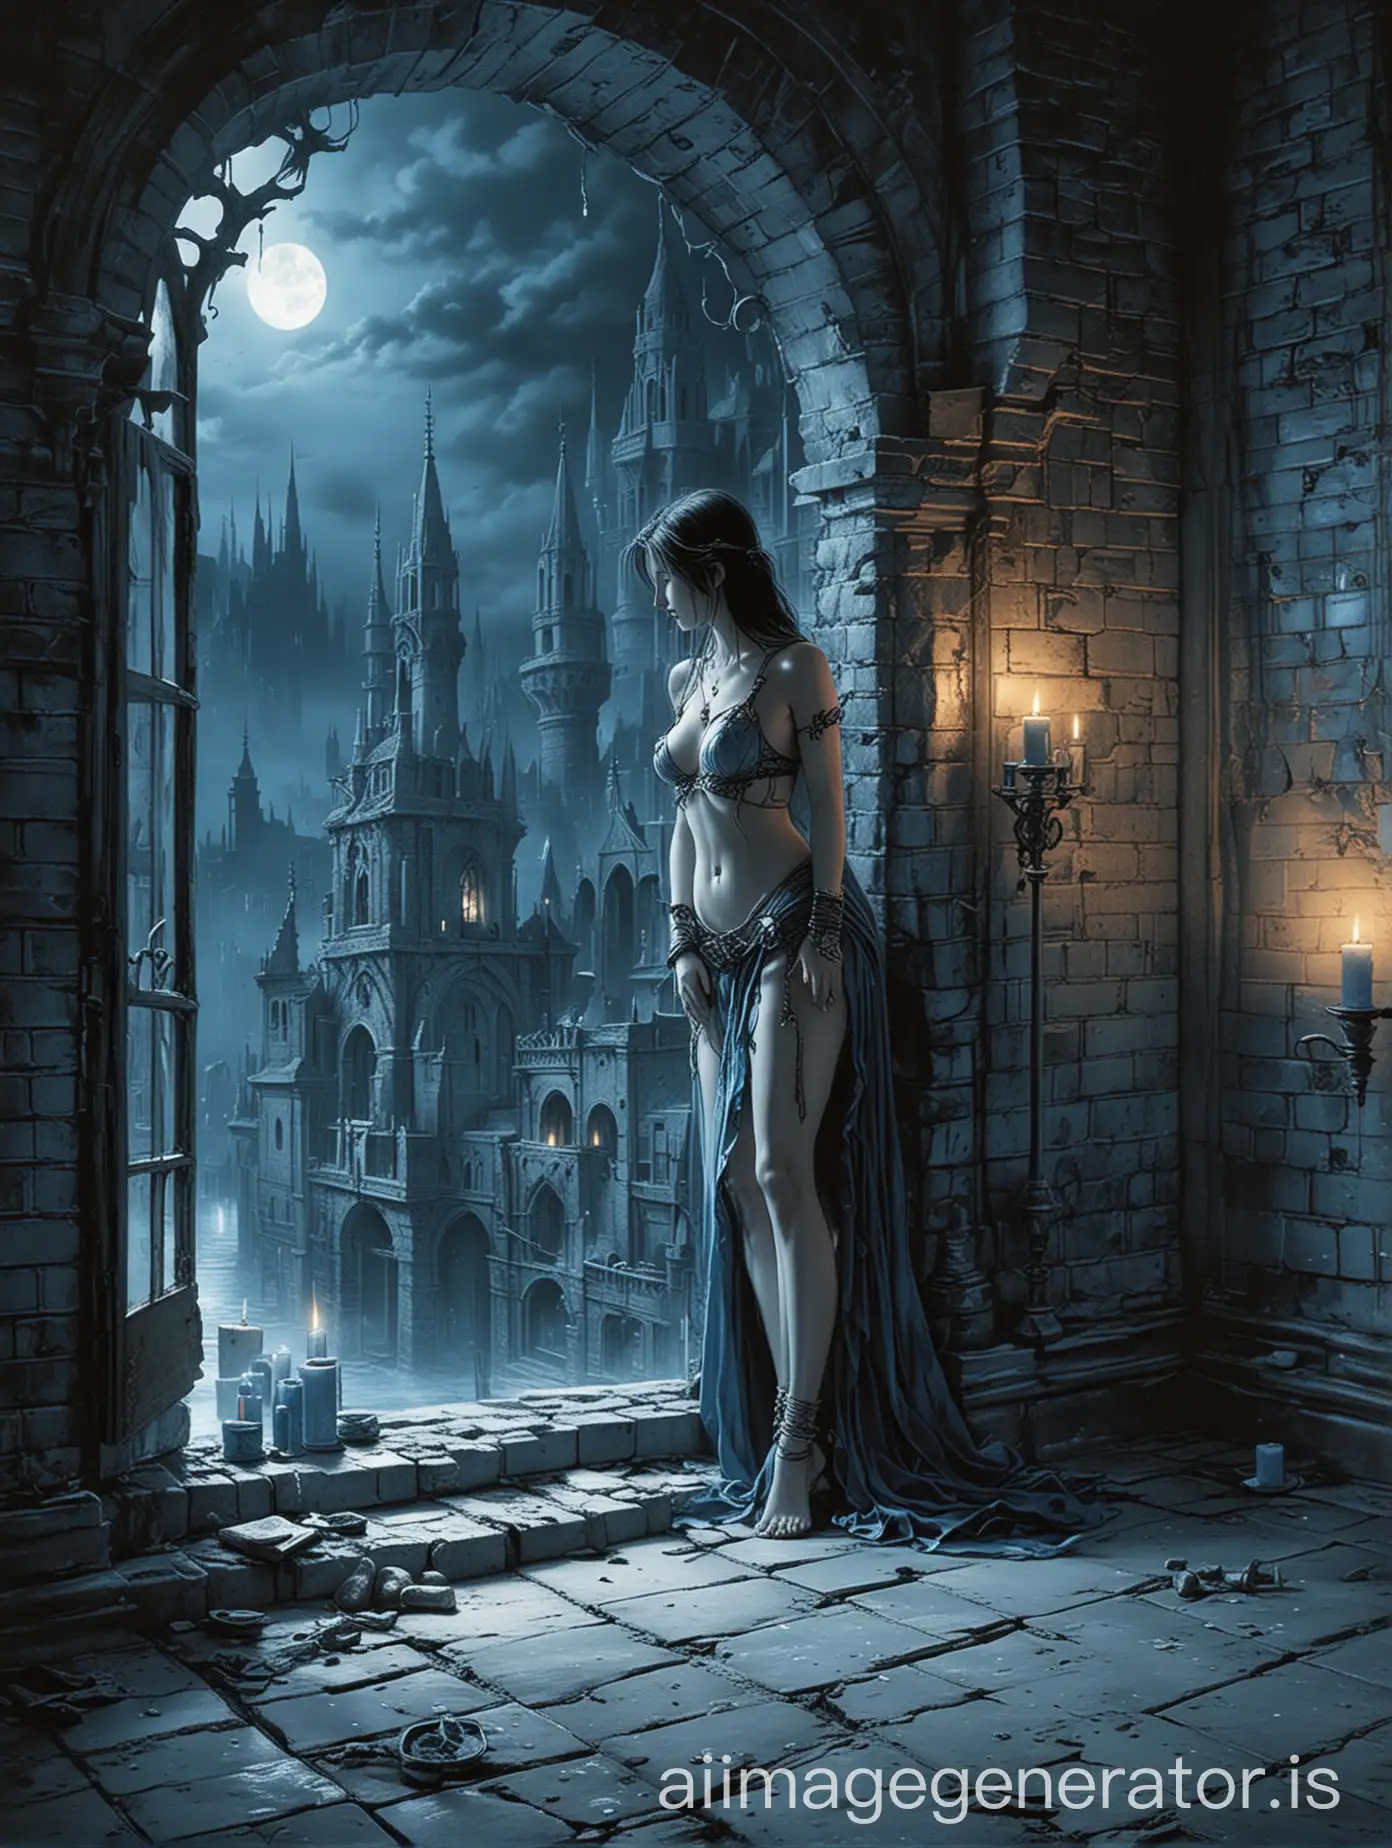 luis royo art style only background, ancient bluetones cityscape in the window, brickwall room, blue midnight backlight, candles on the floor, brickfloor